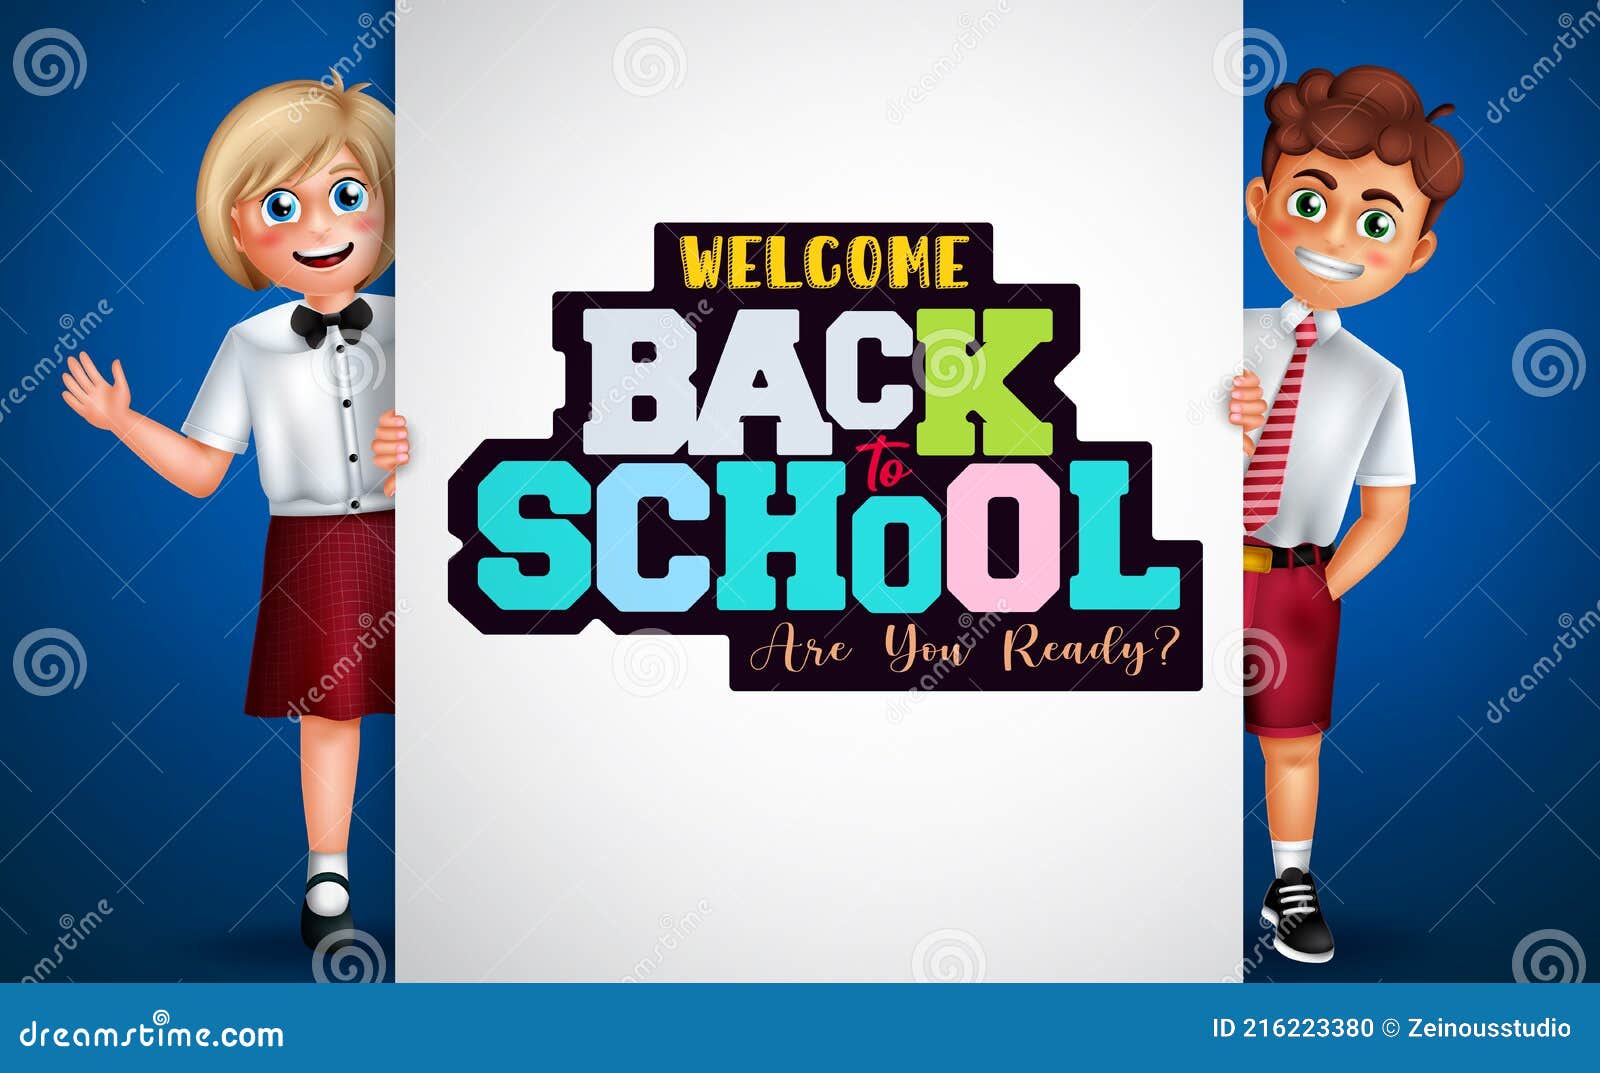 Back to school vector design. Welcome back to school text with